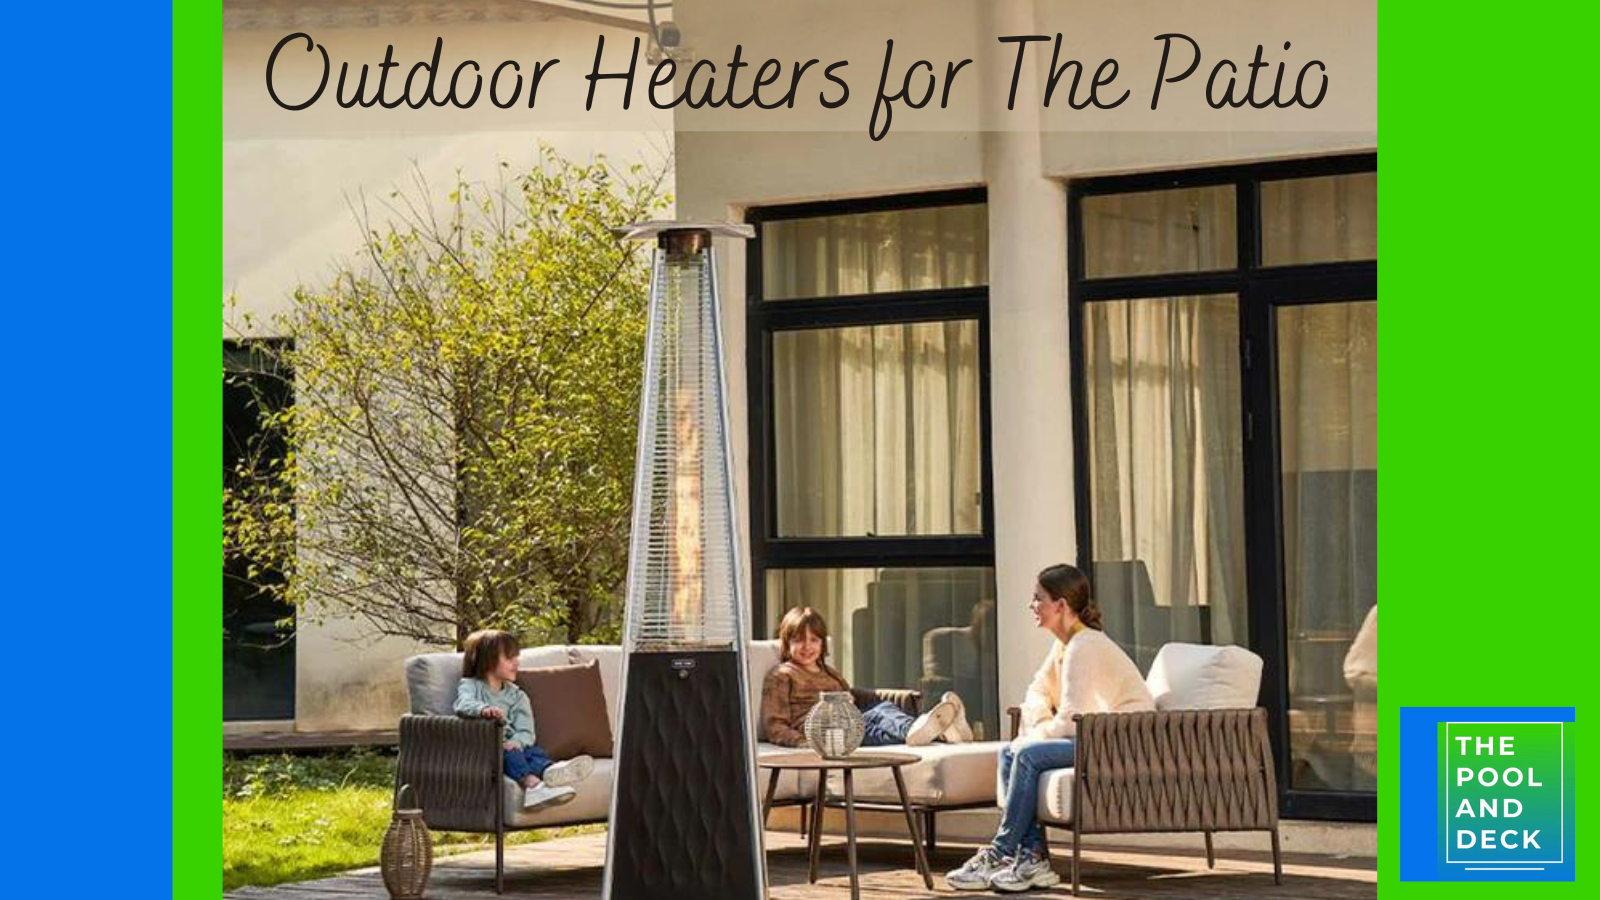 Outdoor Heaters for The Patio